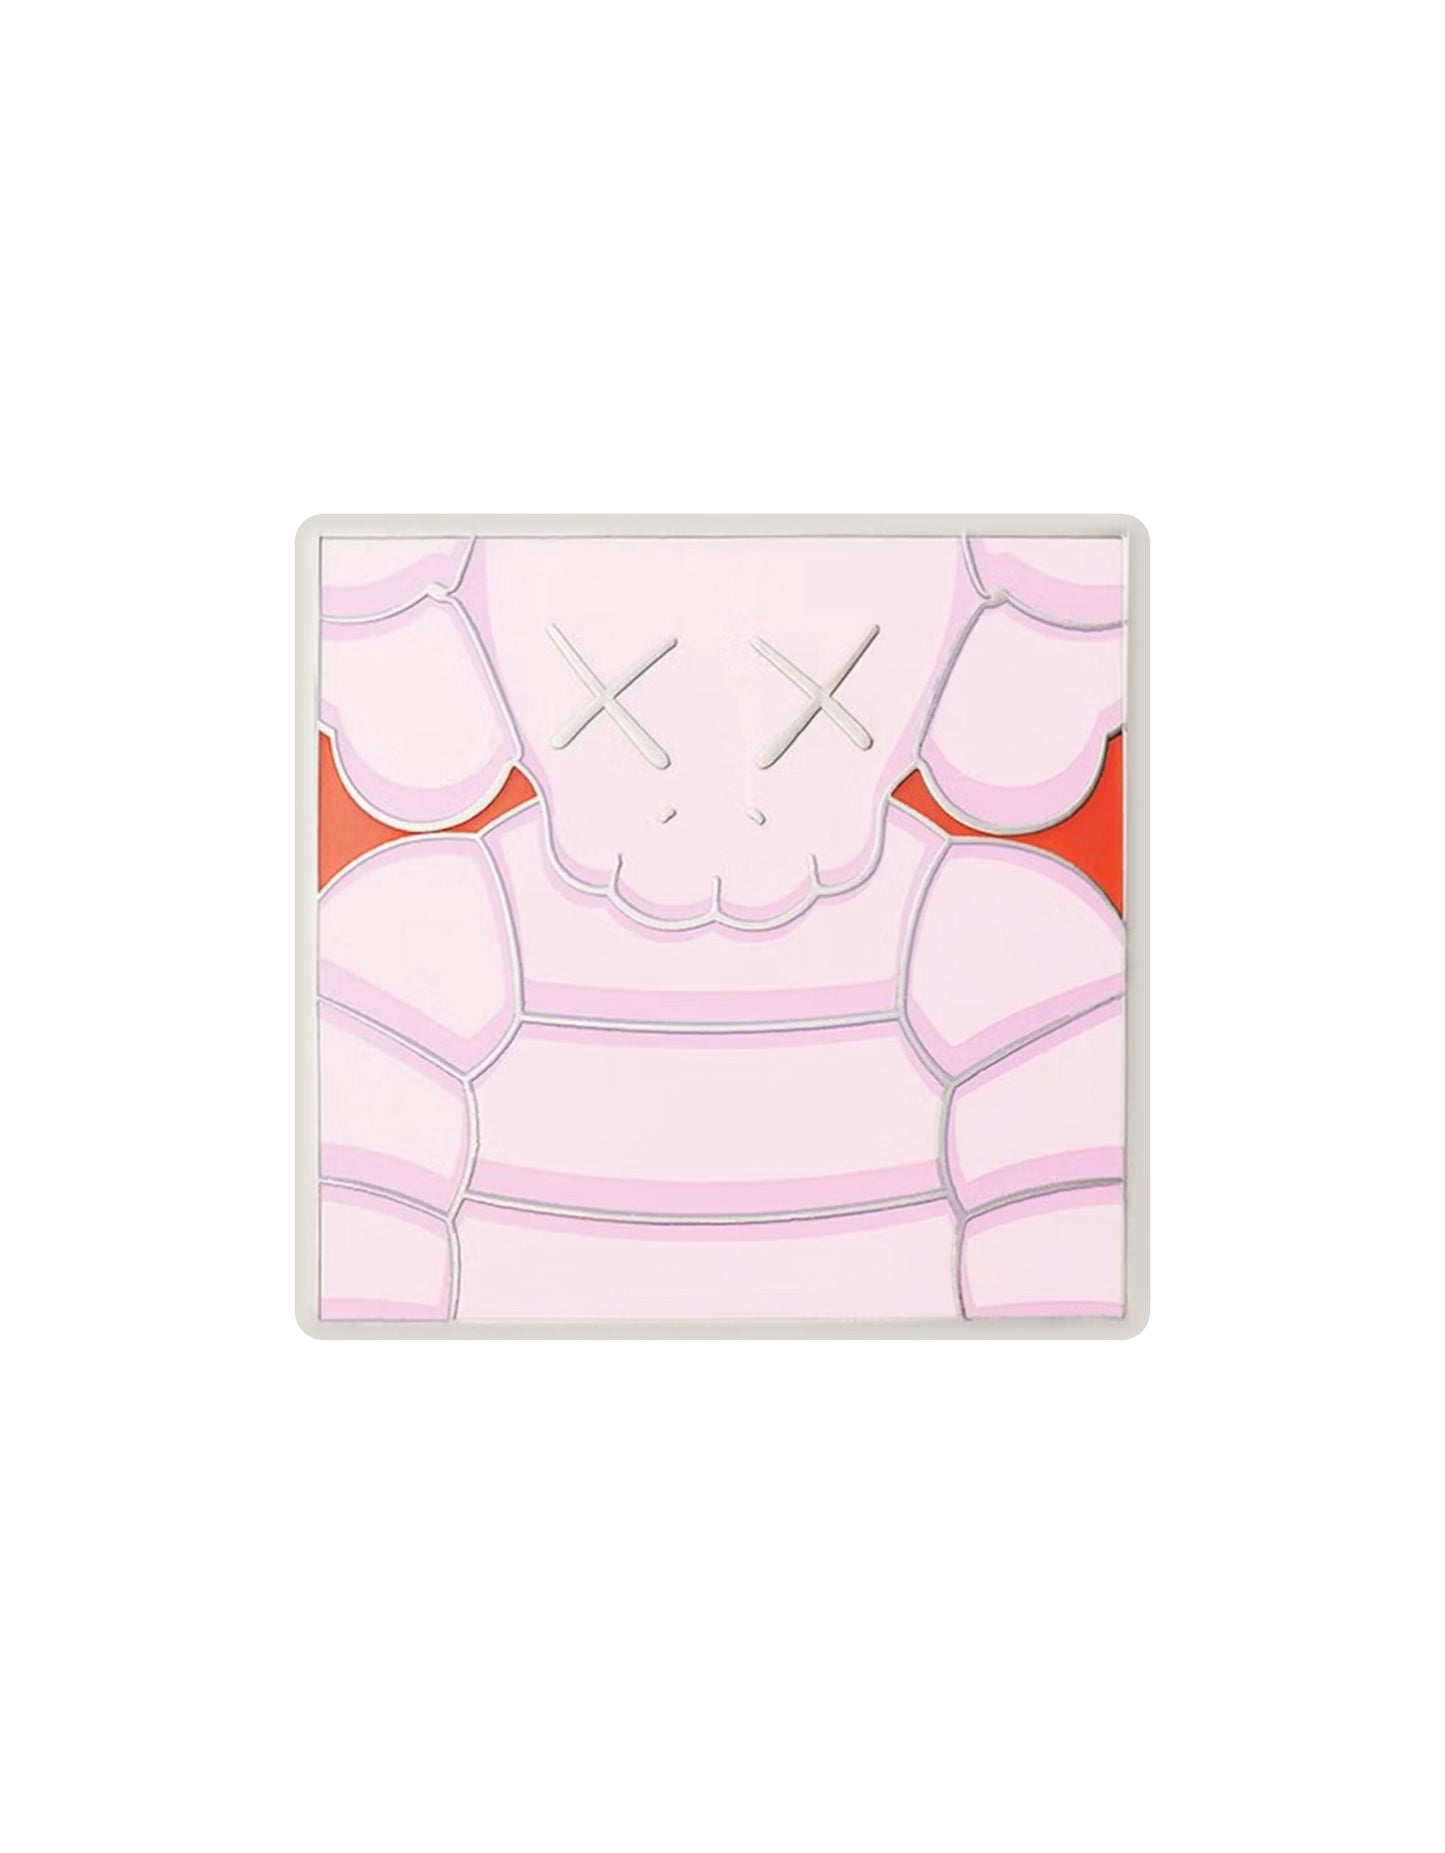 KAWS - Brooklyn Museum WHAT PARTY Square Chum Pink Enamel Pin